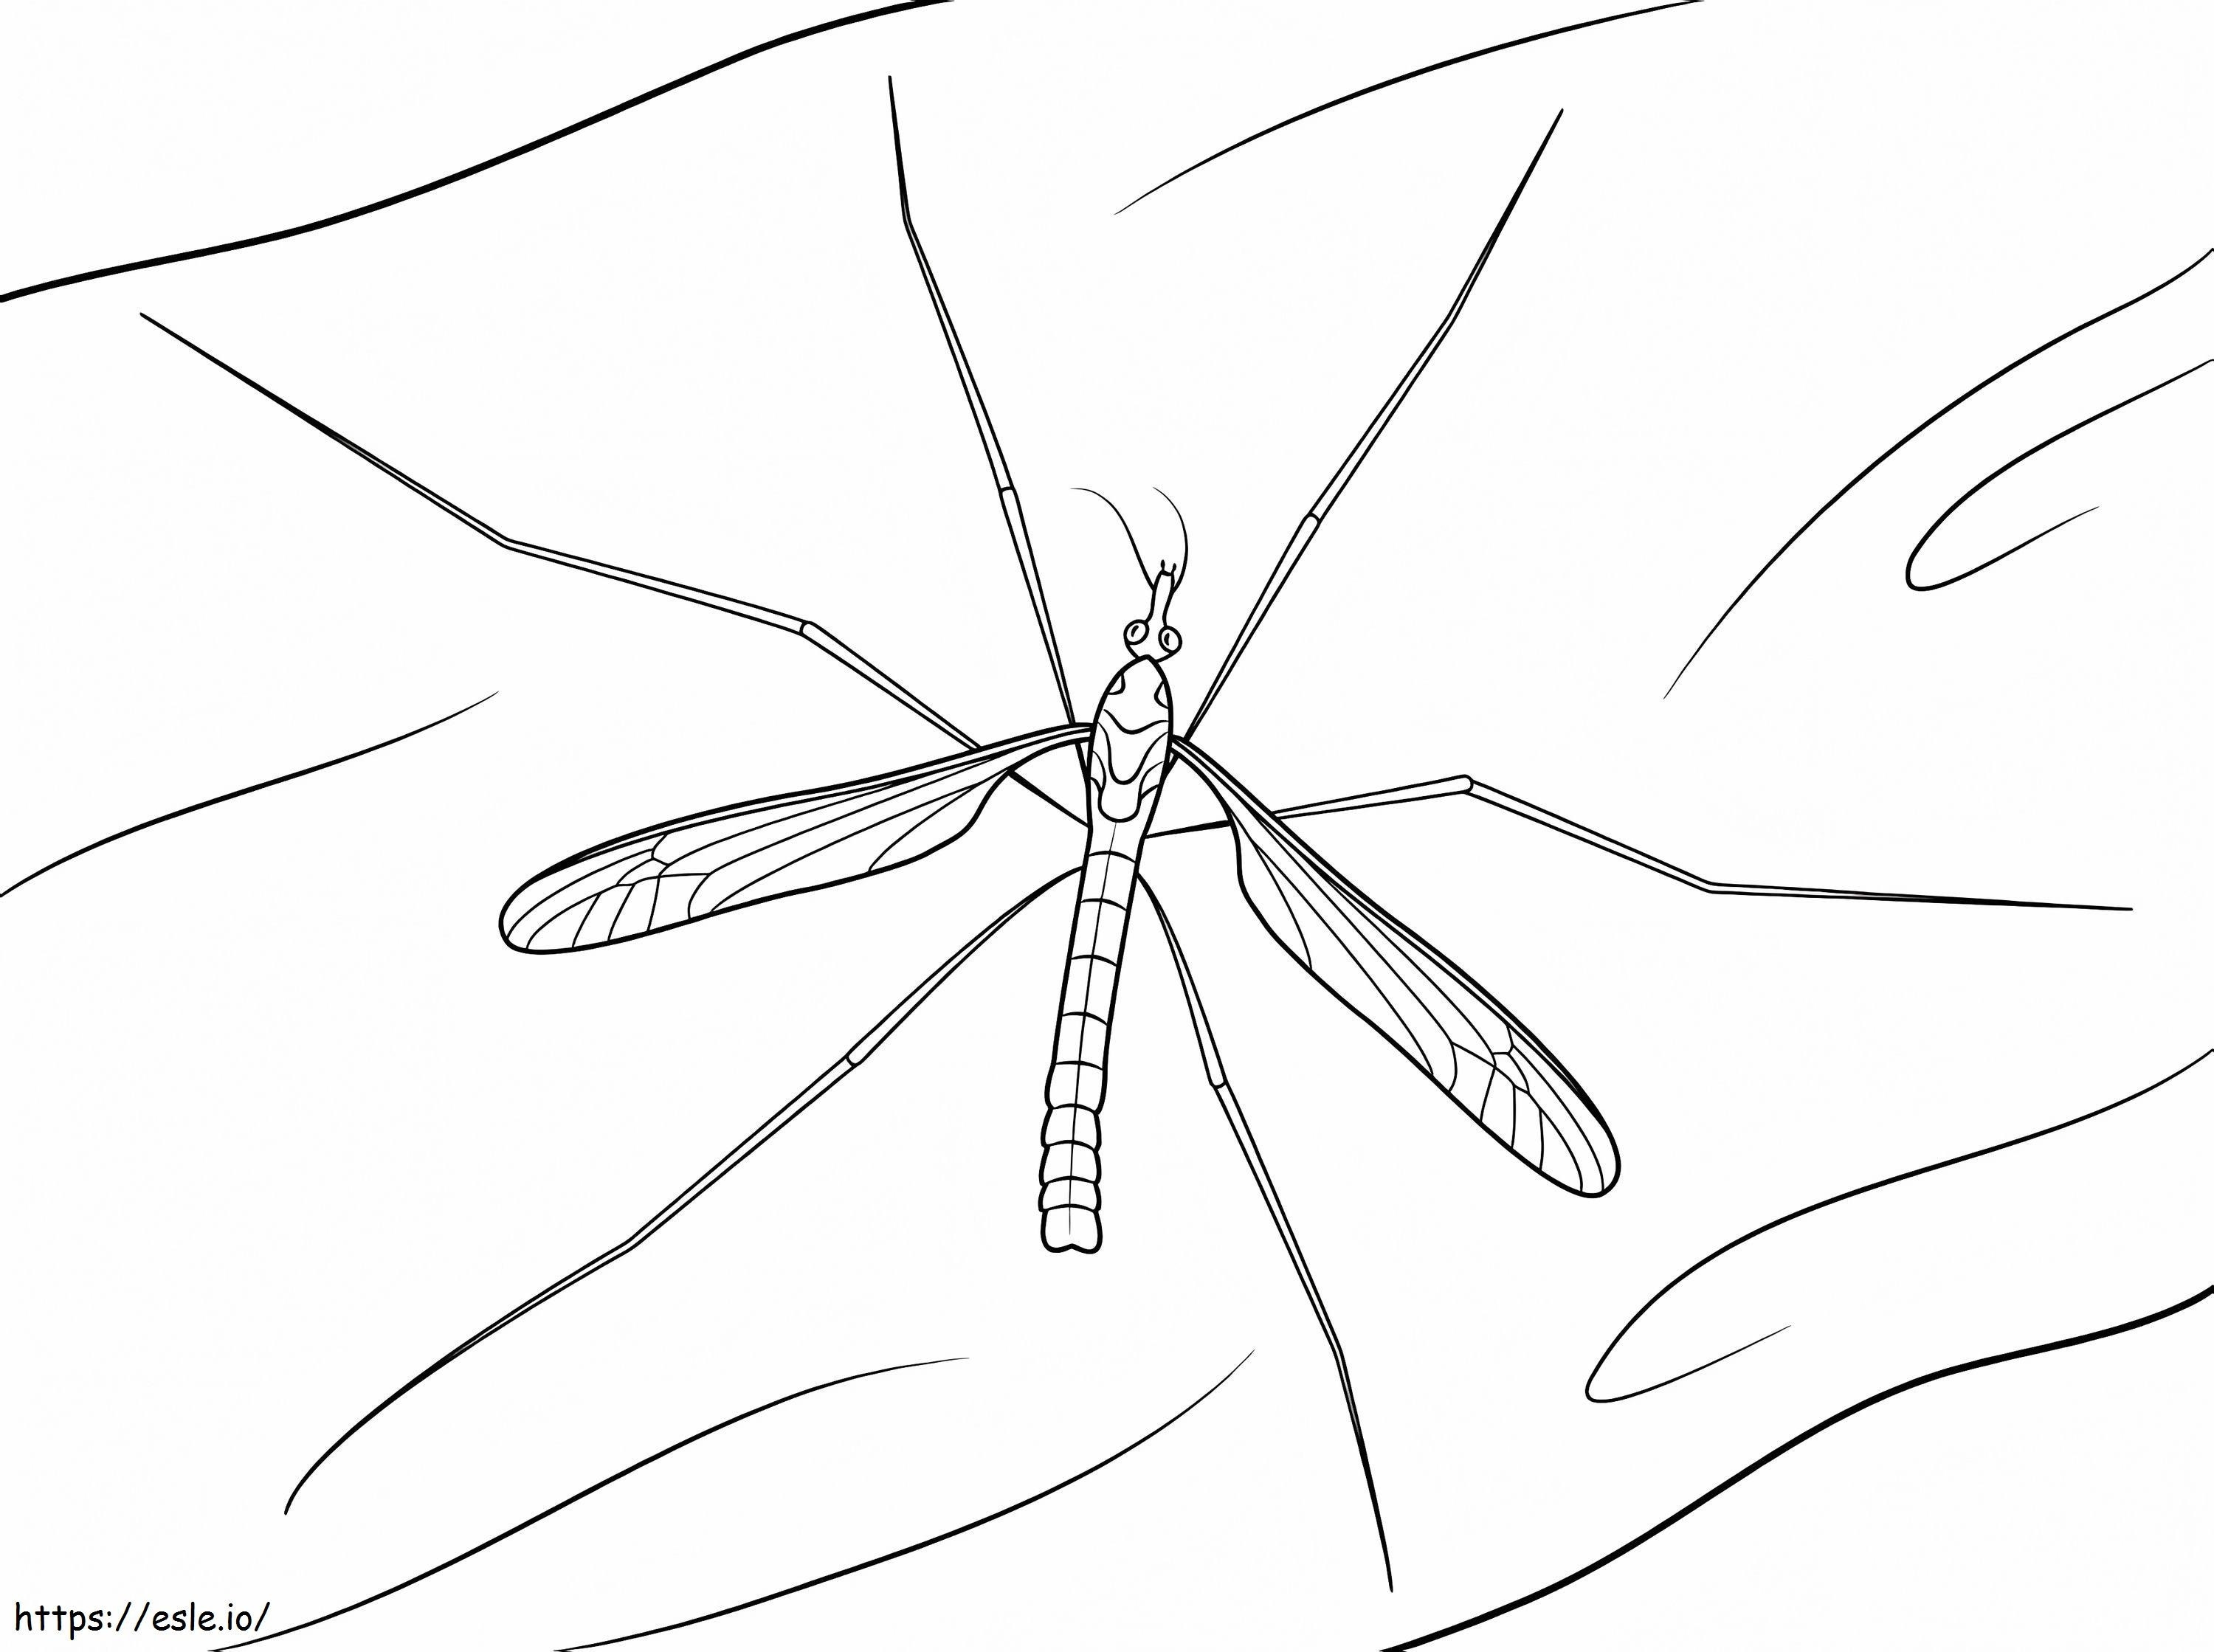 A Mosquito coloring page